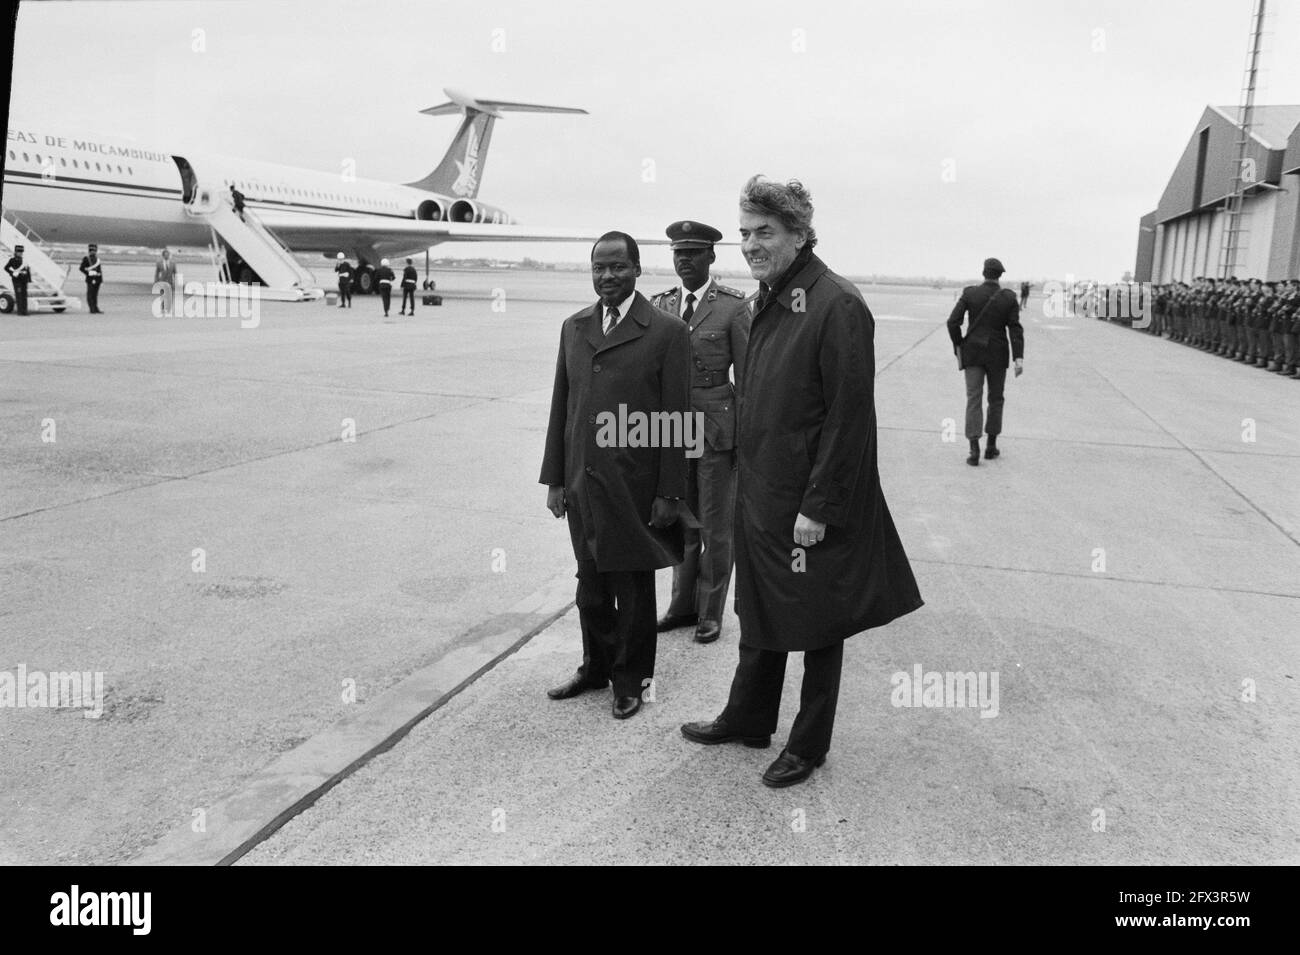 Prime Minister Lubbers with President Chissano of Mozambique at Zestienhoven Airport, March 13, 1989, Prime Ministers, airports, The Netherlands, 20th century press agency photo, news to remember, documentary, historic photography 1945-1990, visual stories, human history of the Twentieth Century, capturing moments in time Stock Photo